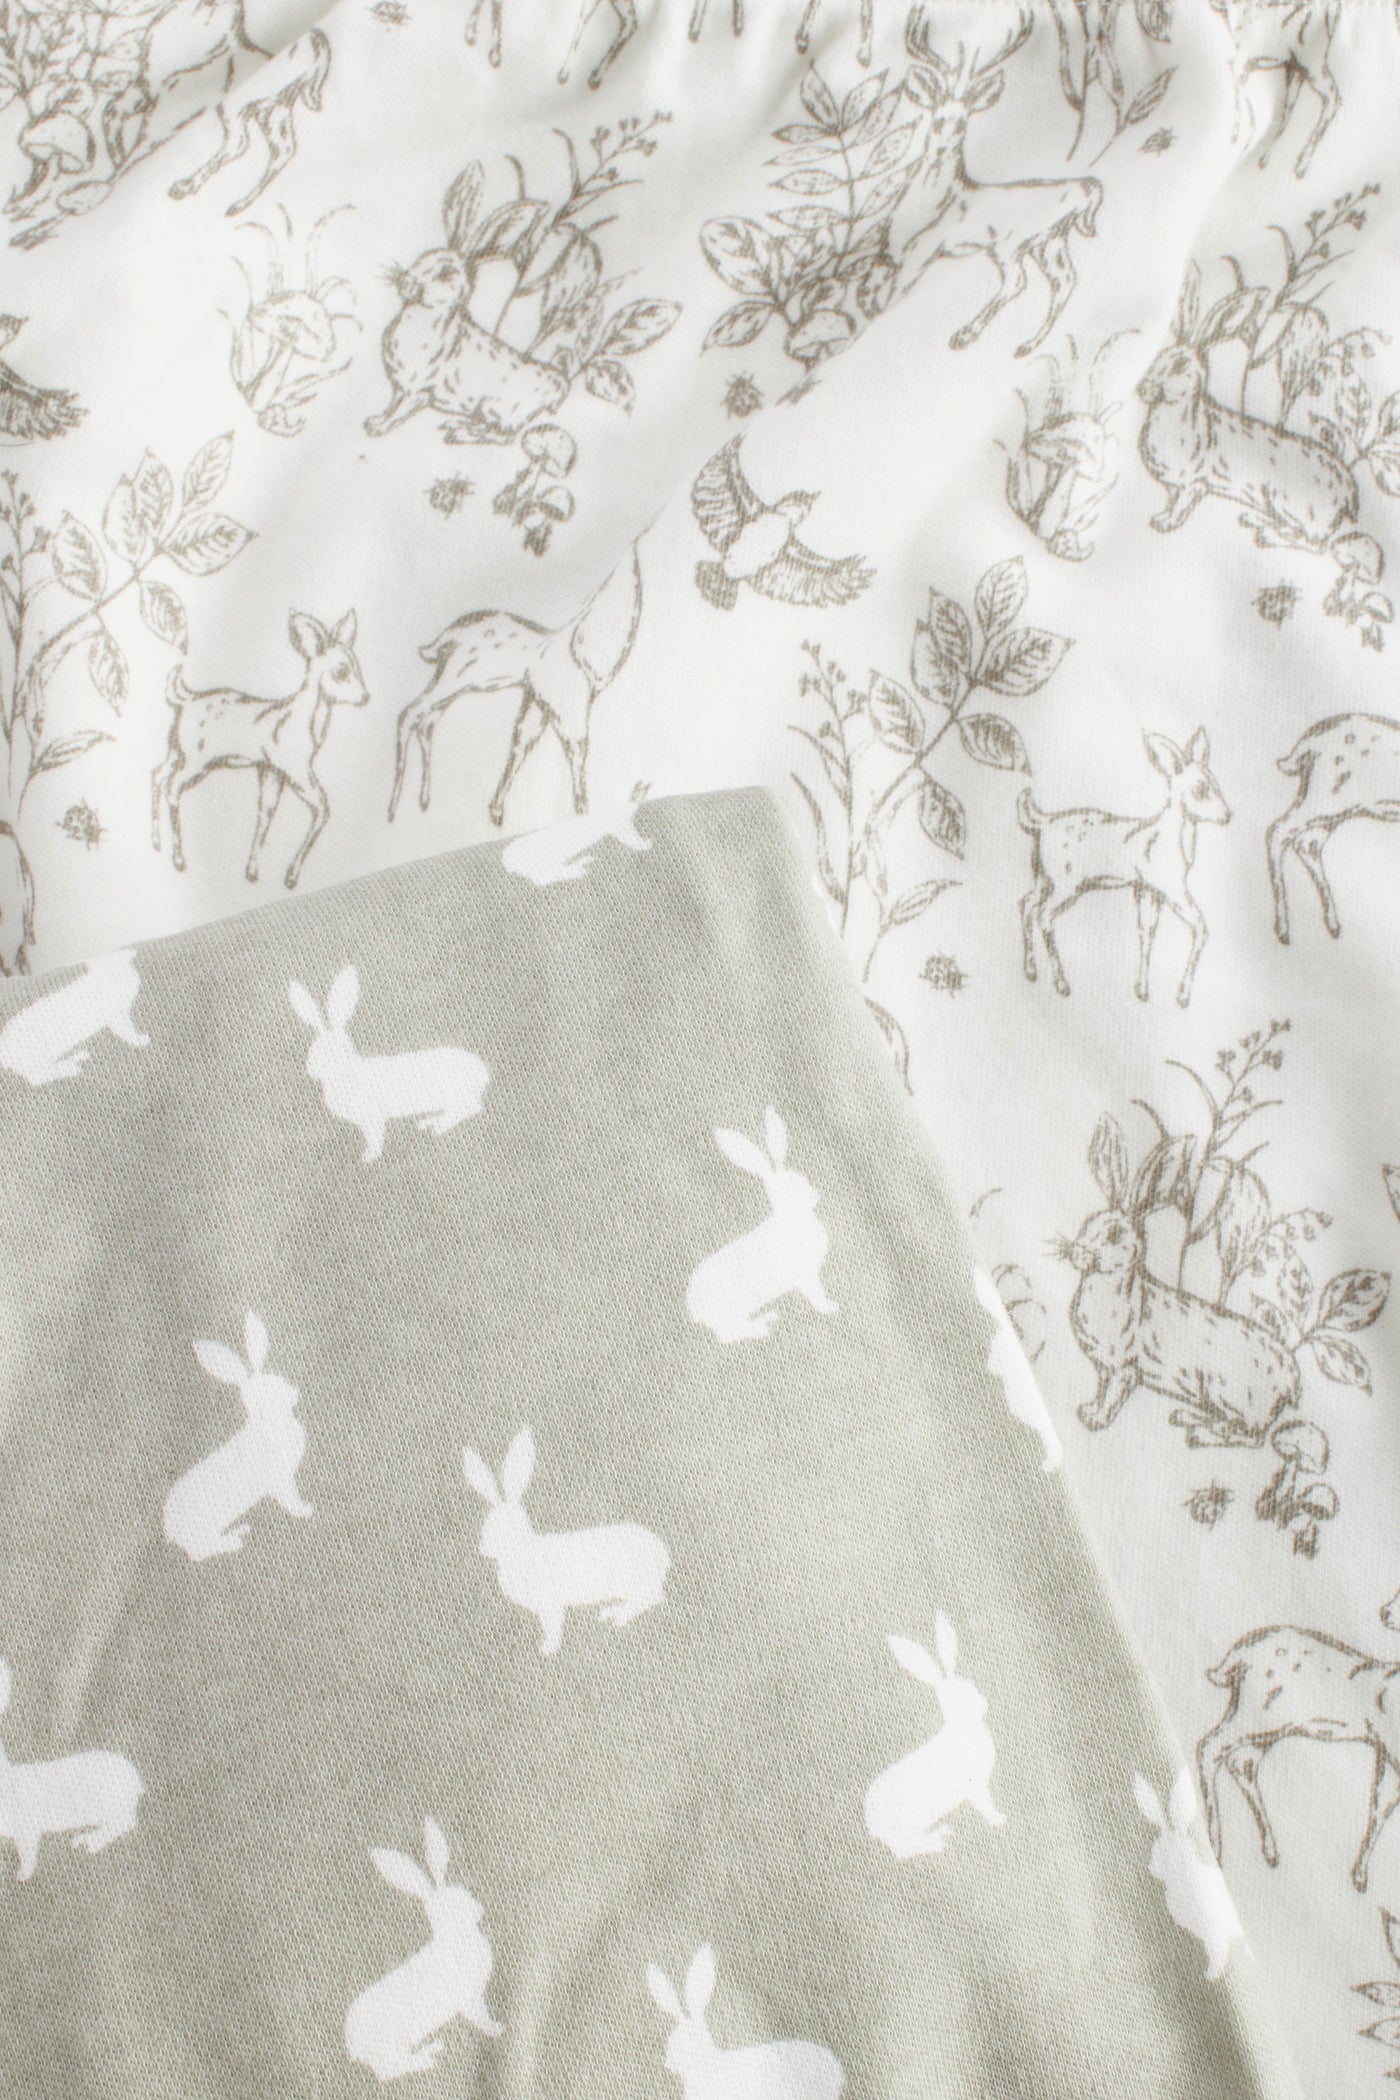 2pk Fitted Jersey Cot Sheet, white woodland andFawn hare print